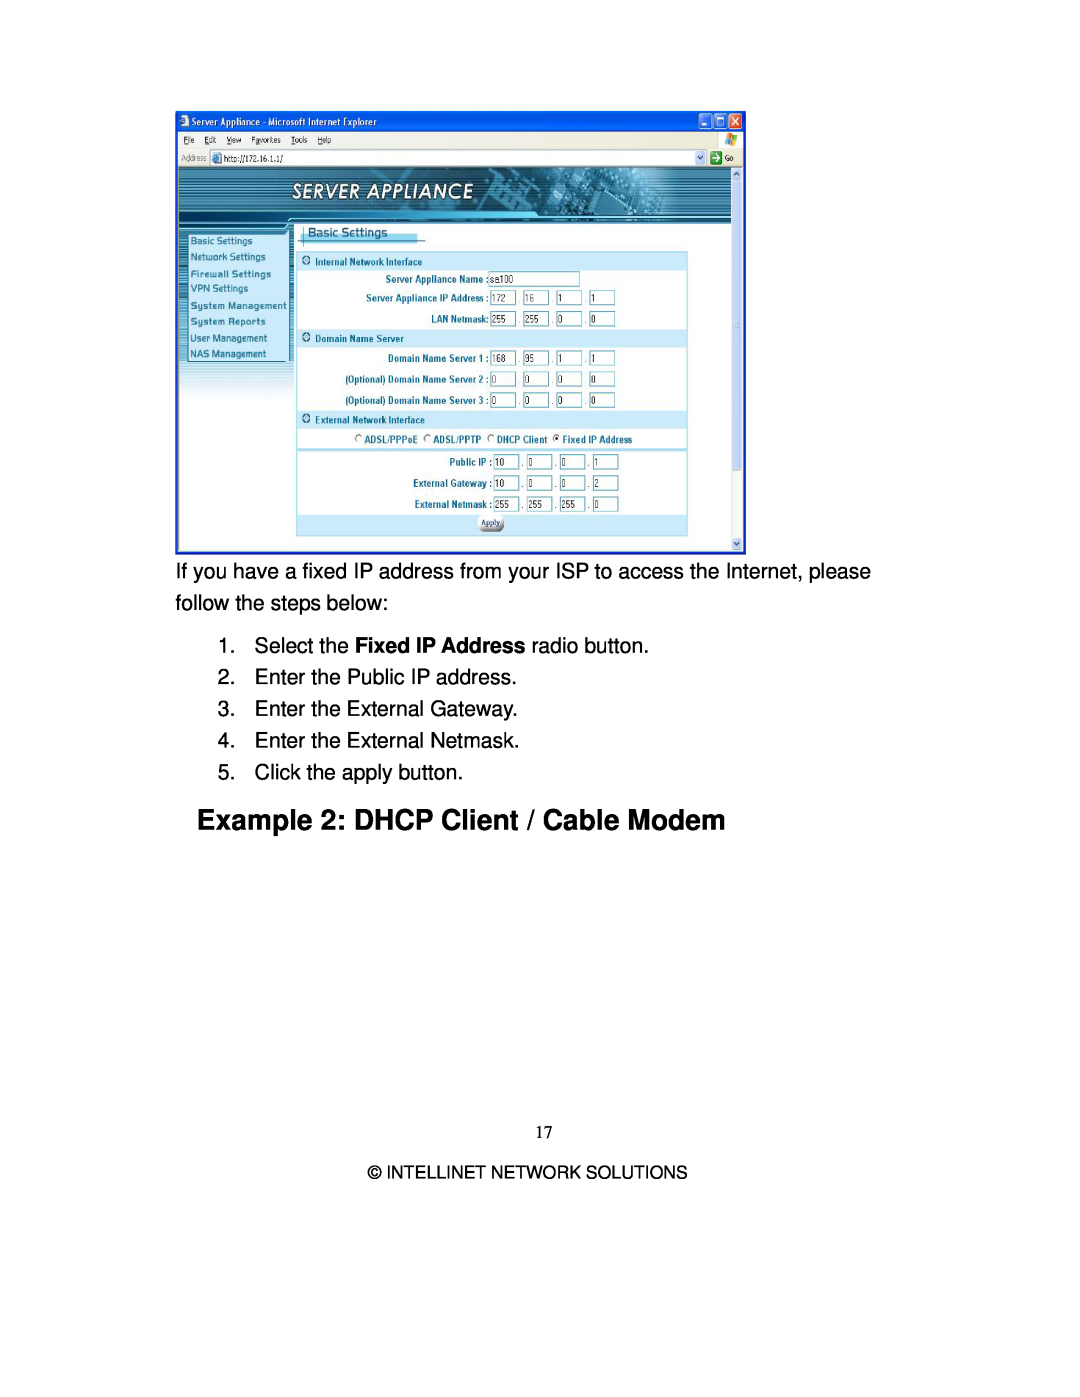 Intellinet Network Solutions 501705 manual Example 2 DHCP Client / Cable Modem, Select the Fixed IP Address radio button 